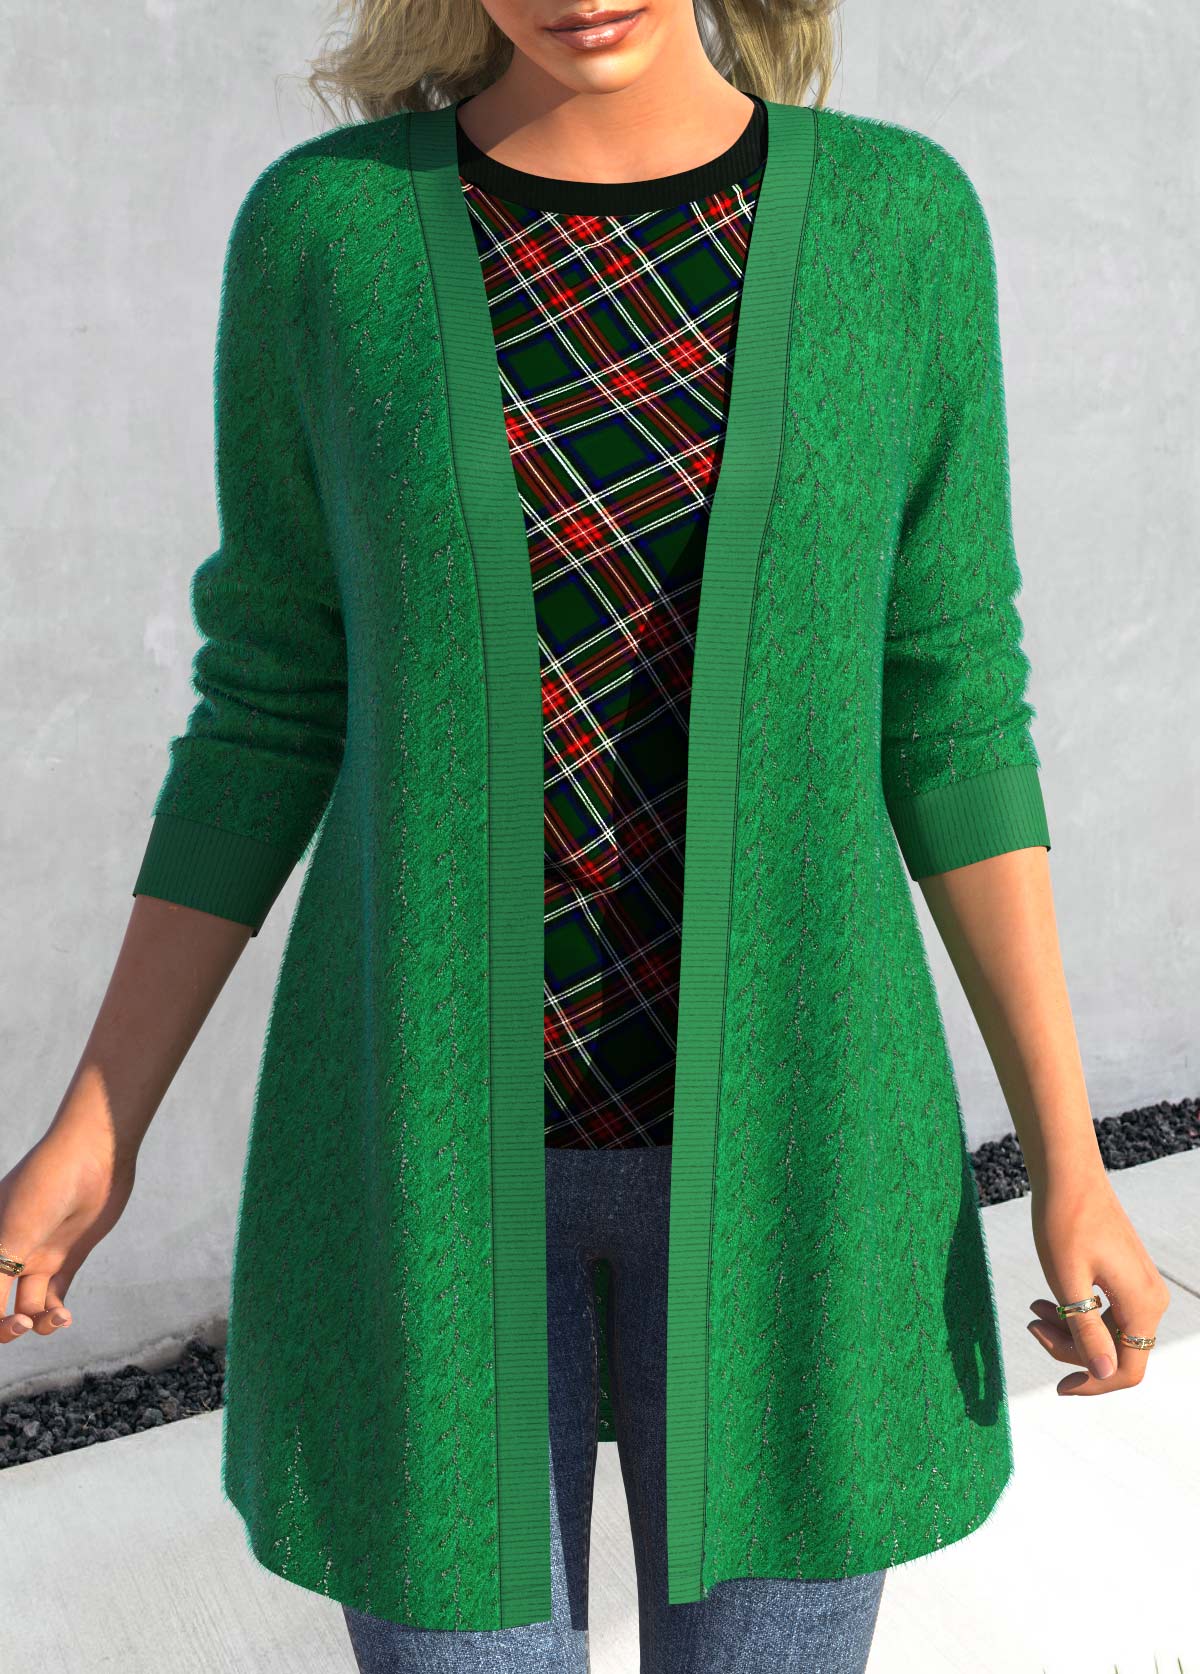 ROTITA Lace Green Long Sleeve Open Front Coat